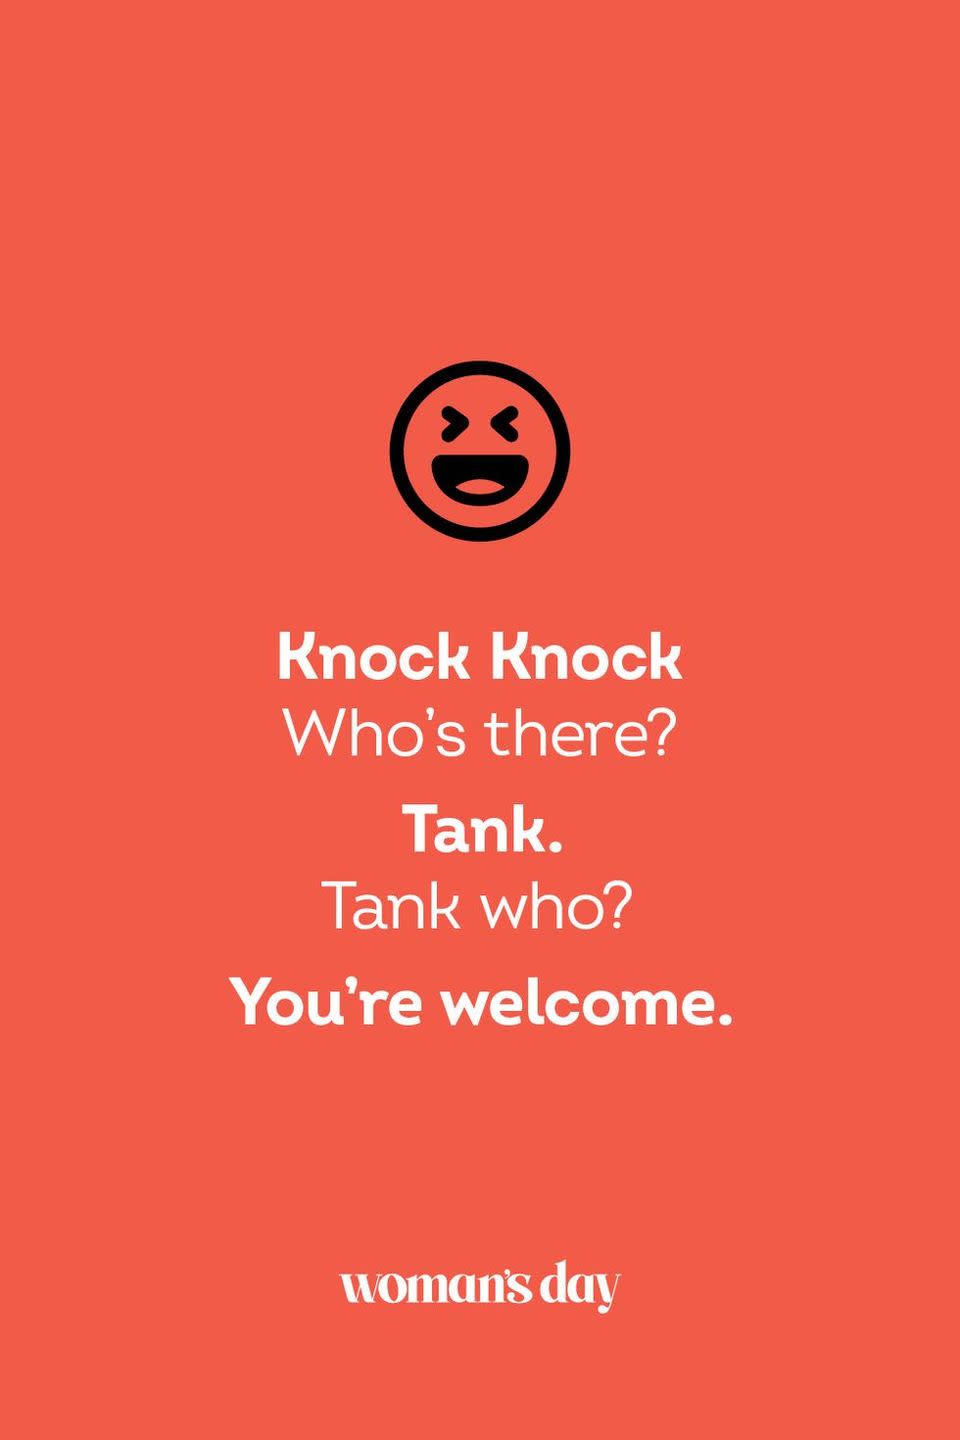 <p><strong>Knock Knock</strong></p><p><em>Who’s there? </em></p><p><strong>Tank.</strong></p><p><em>Tank who?</em></p><p><strong>You’re welcome.</strong></p>